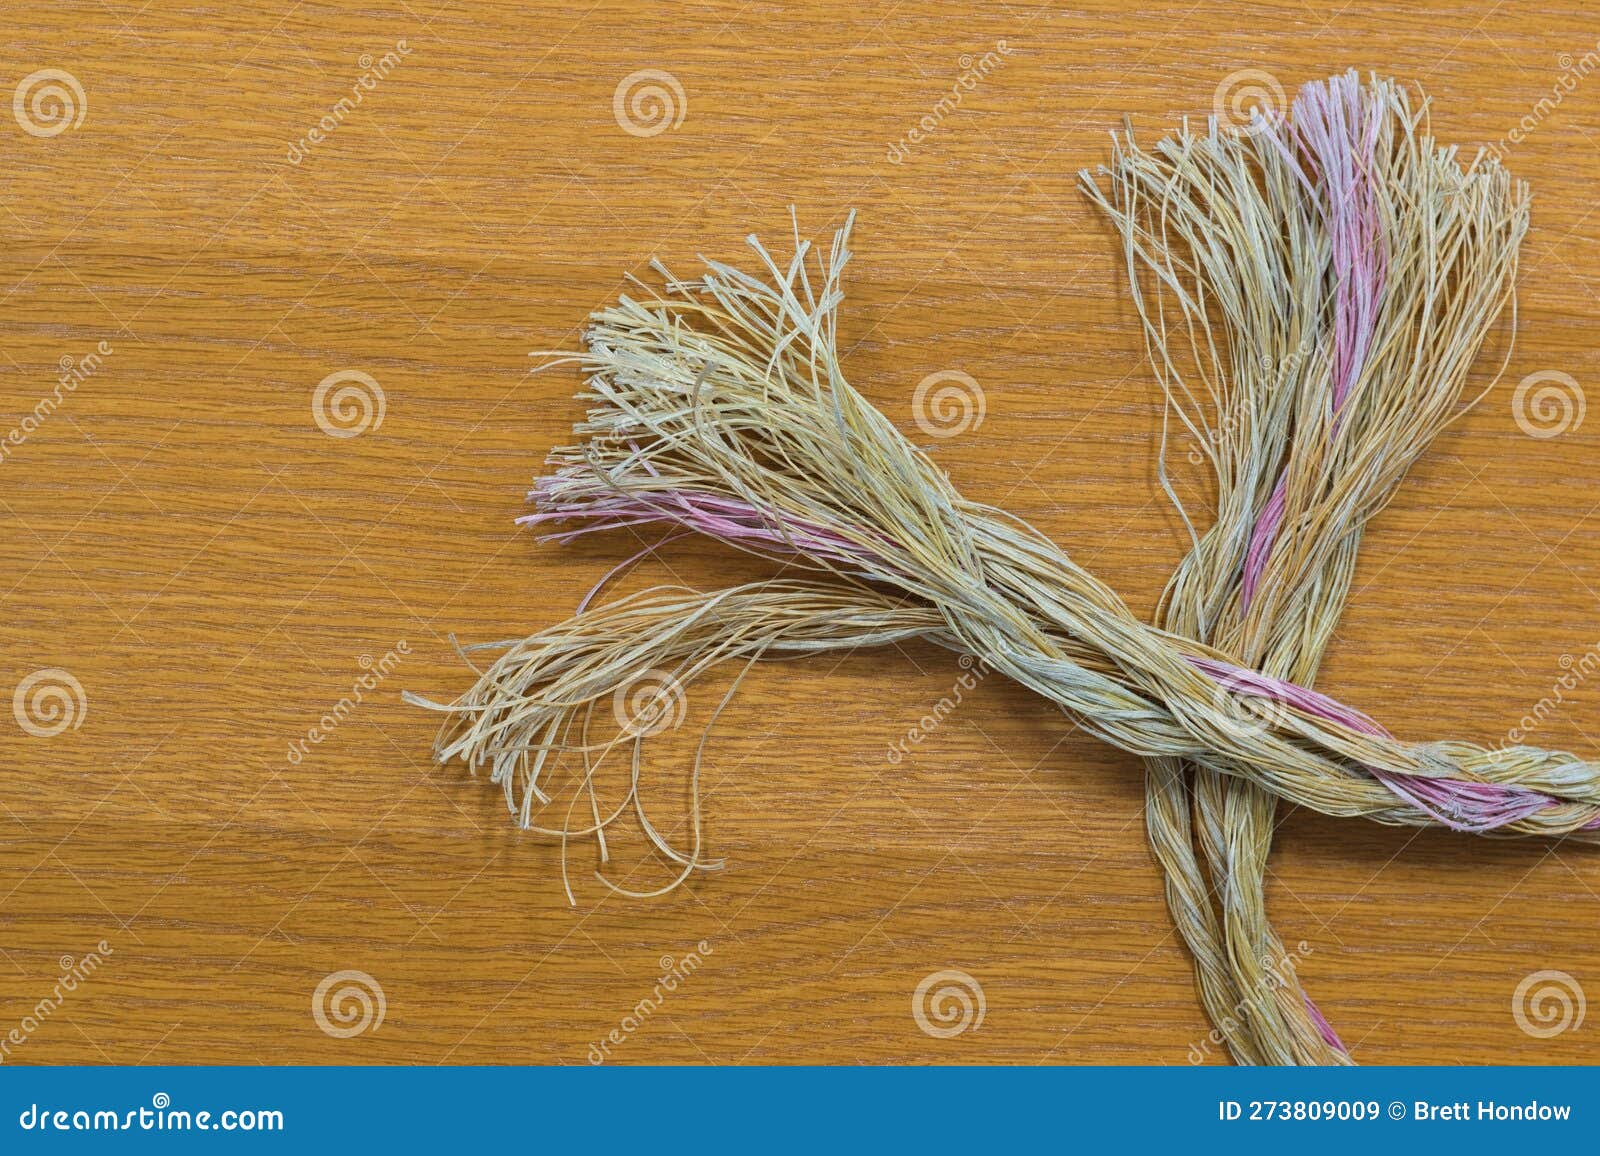 Two Frayed Rope Ends Crisscrossed, Broken and Severed in the Middle on a  Plain Wooden Background. Stock Image - Image of connection, neglect:  273809009